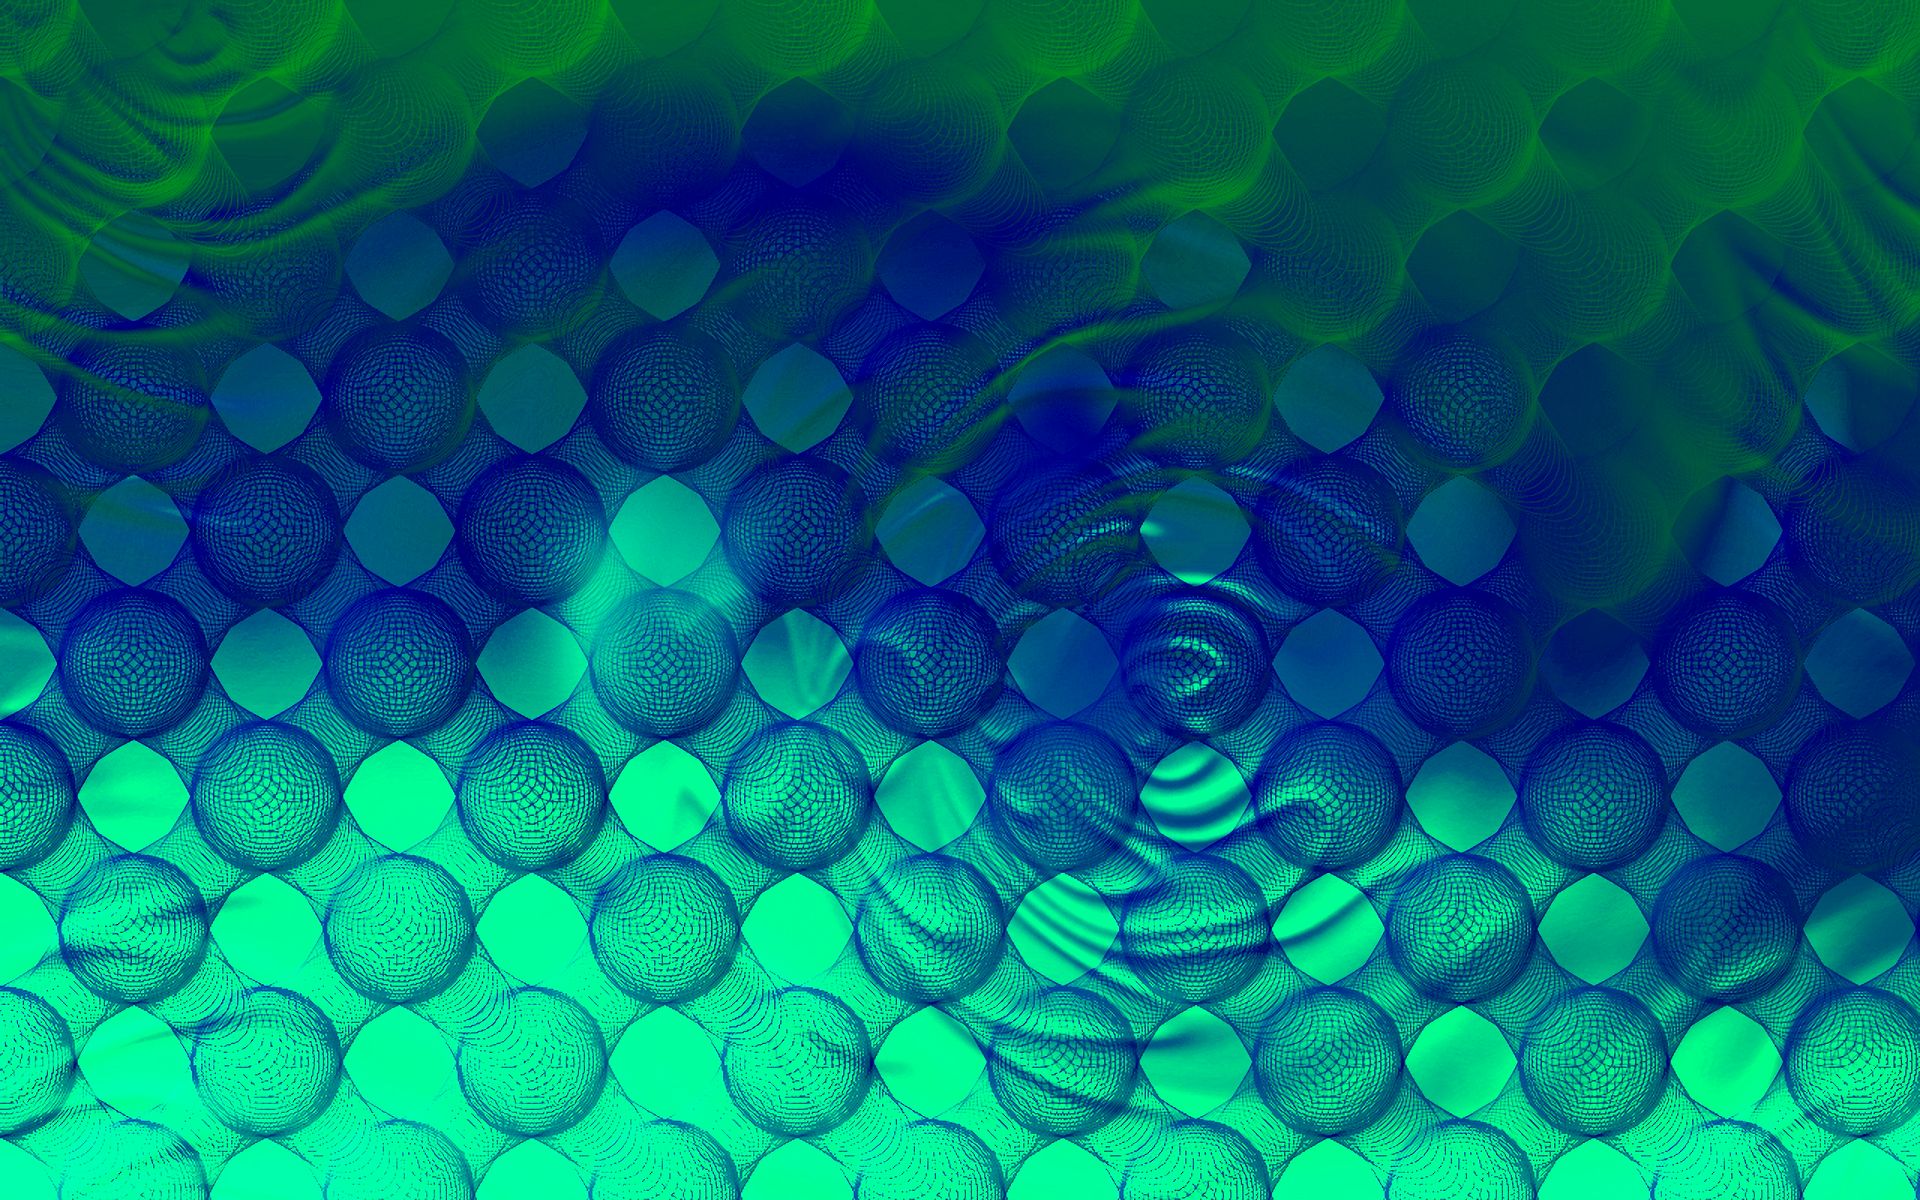 green, abstract, pattern, blue, circle, octagon, ripple, water